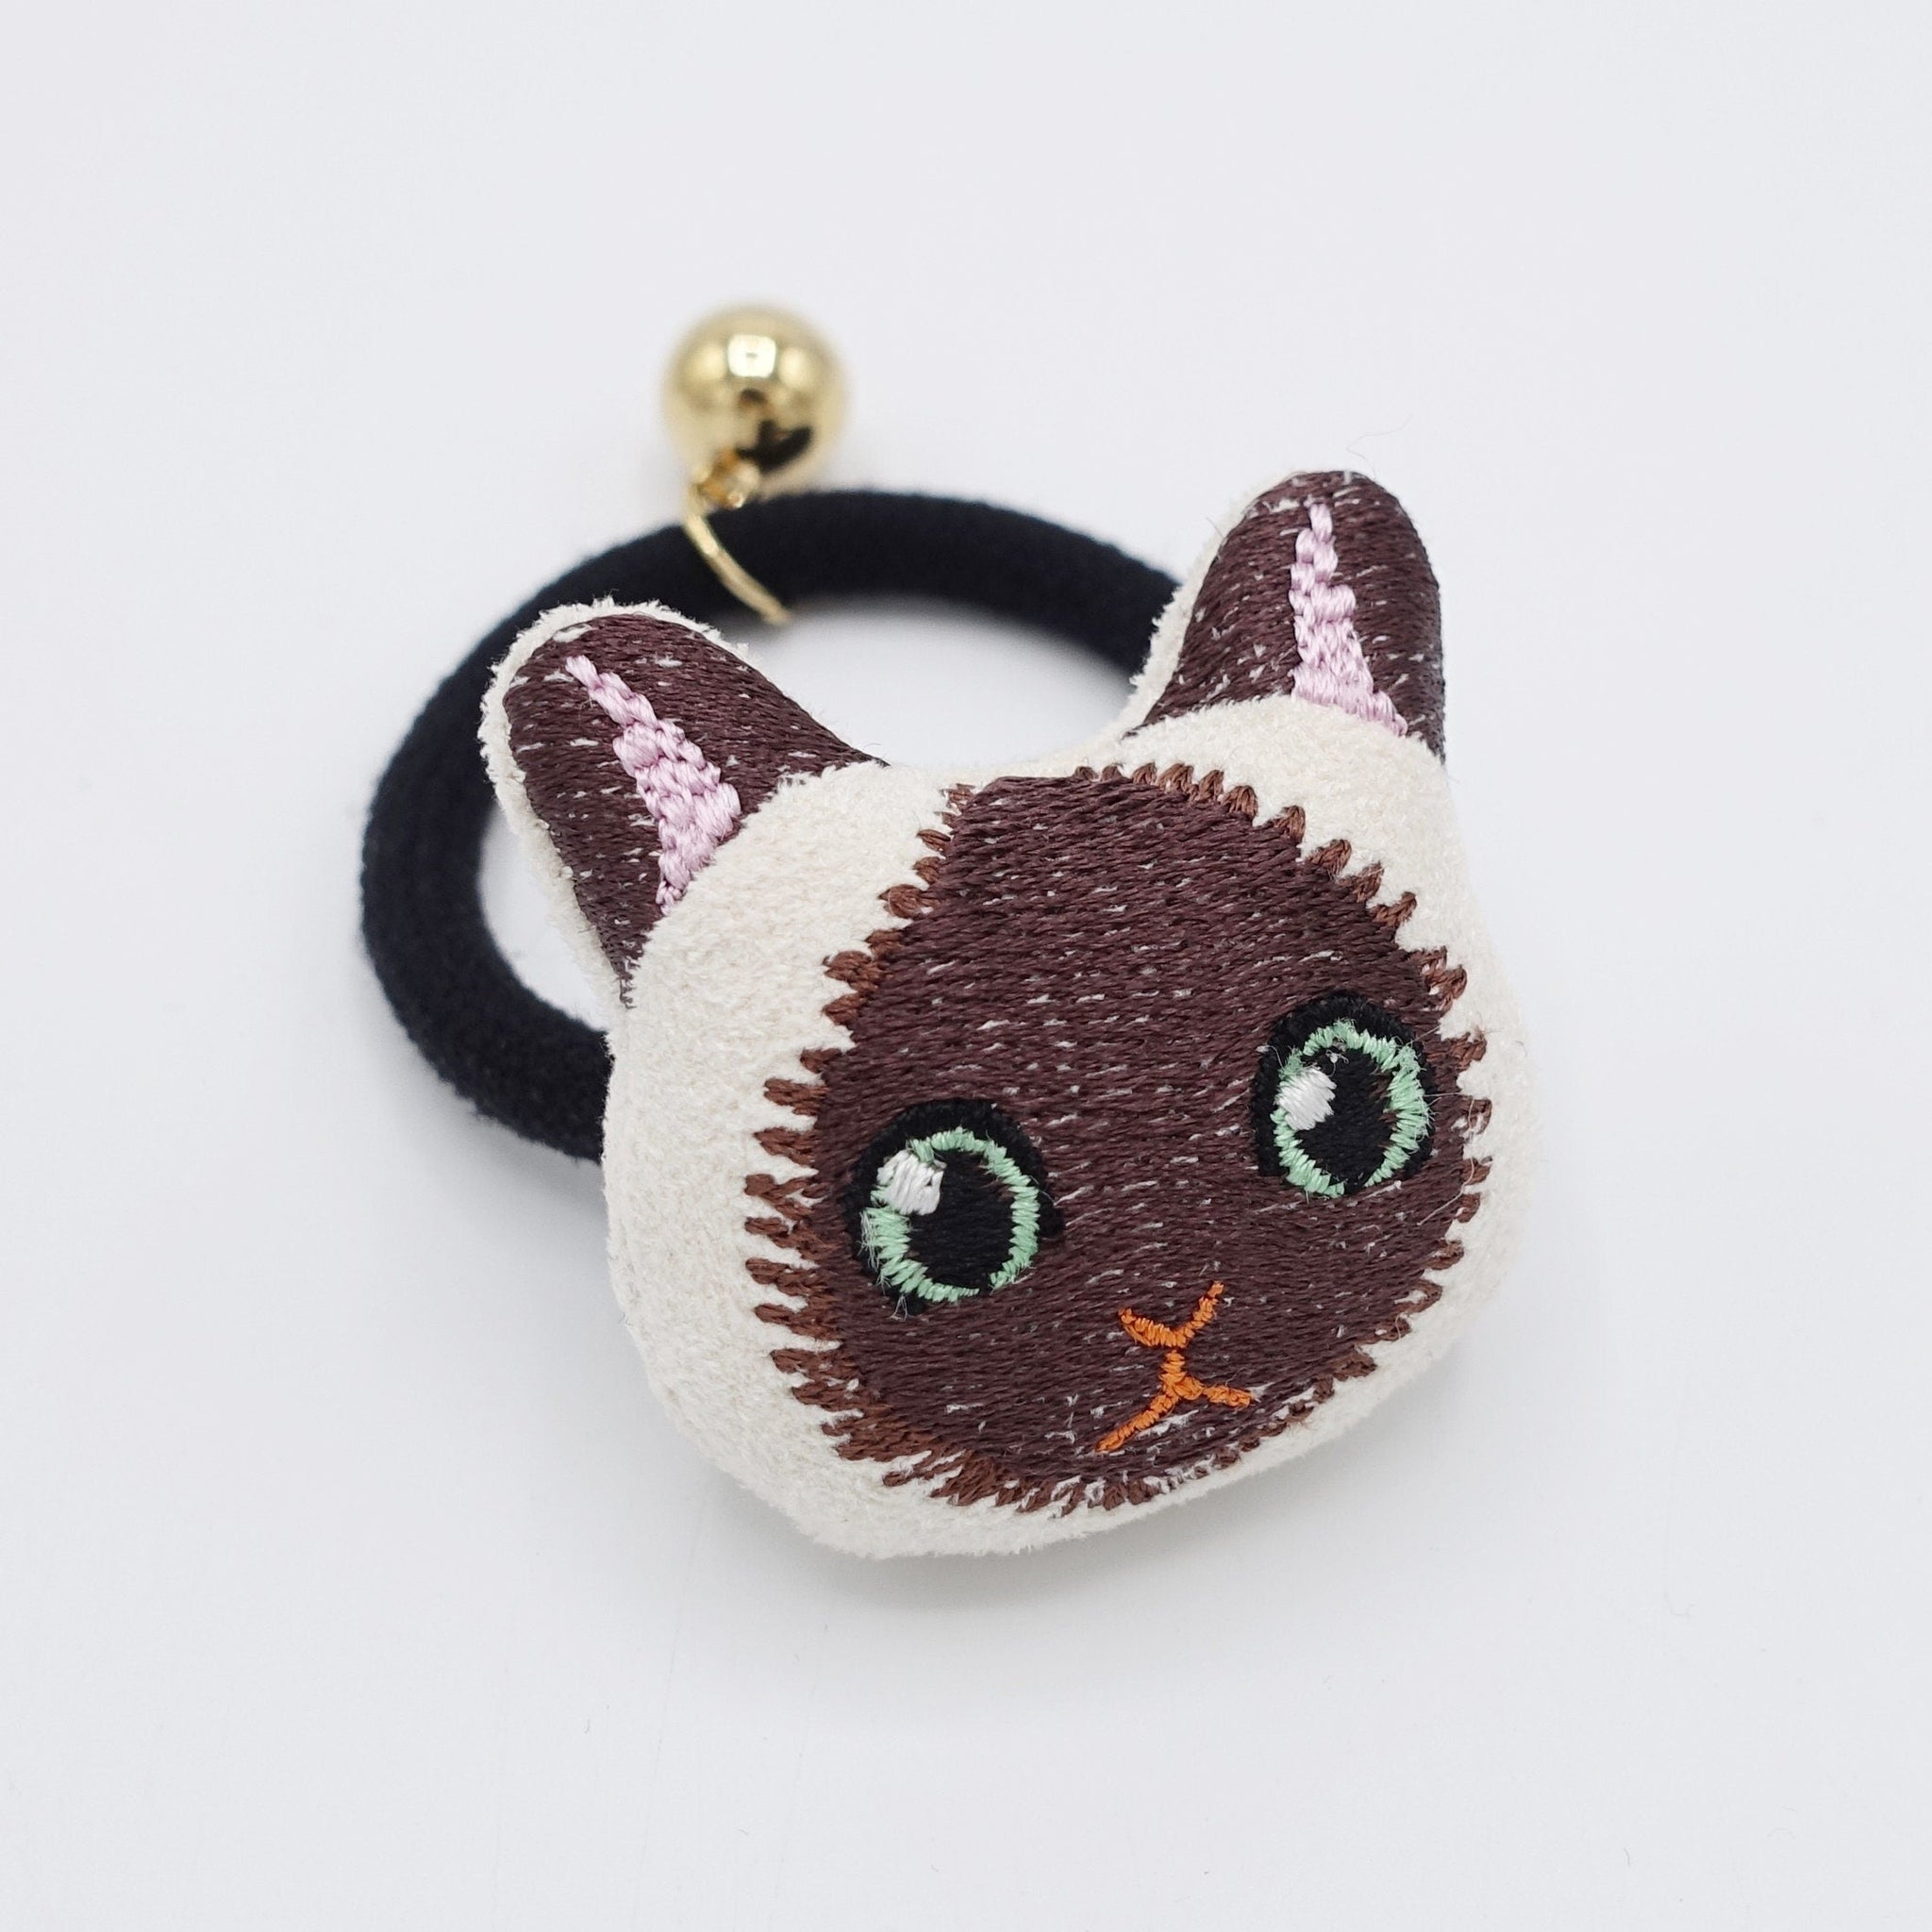 VeryShine Siamese cat cat embroidery hair elastic character ponytail holder hair ties